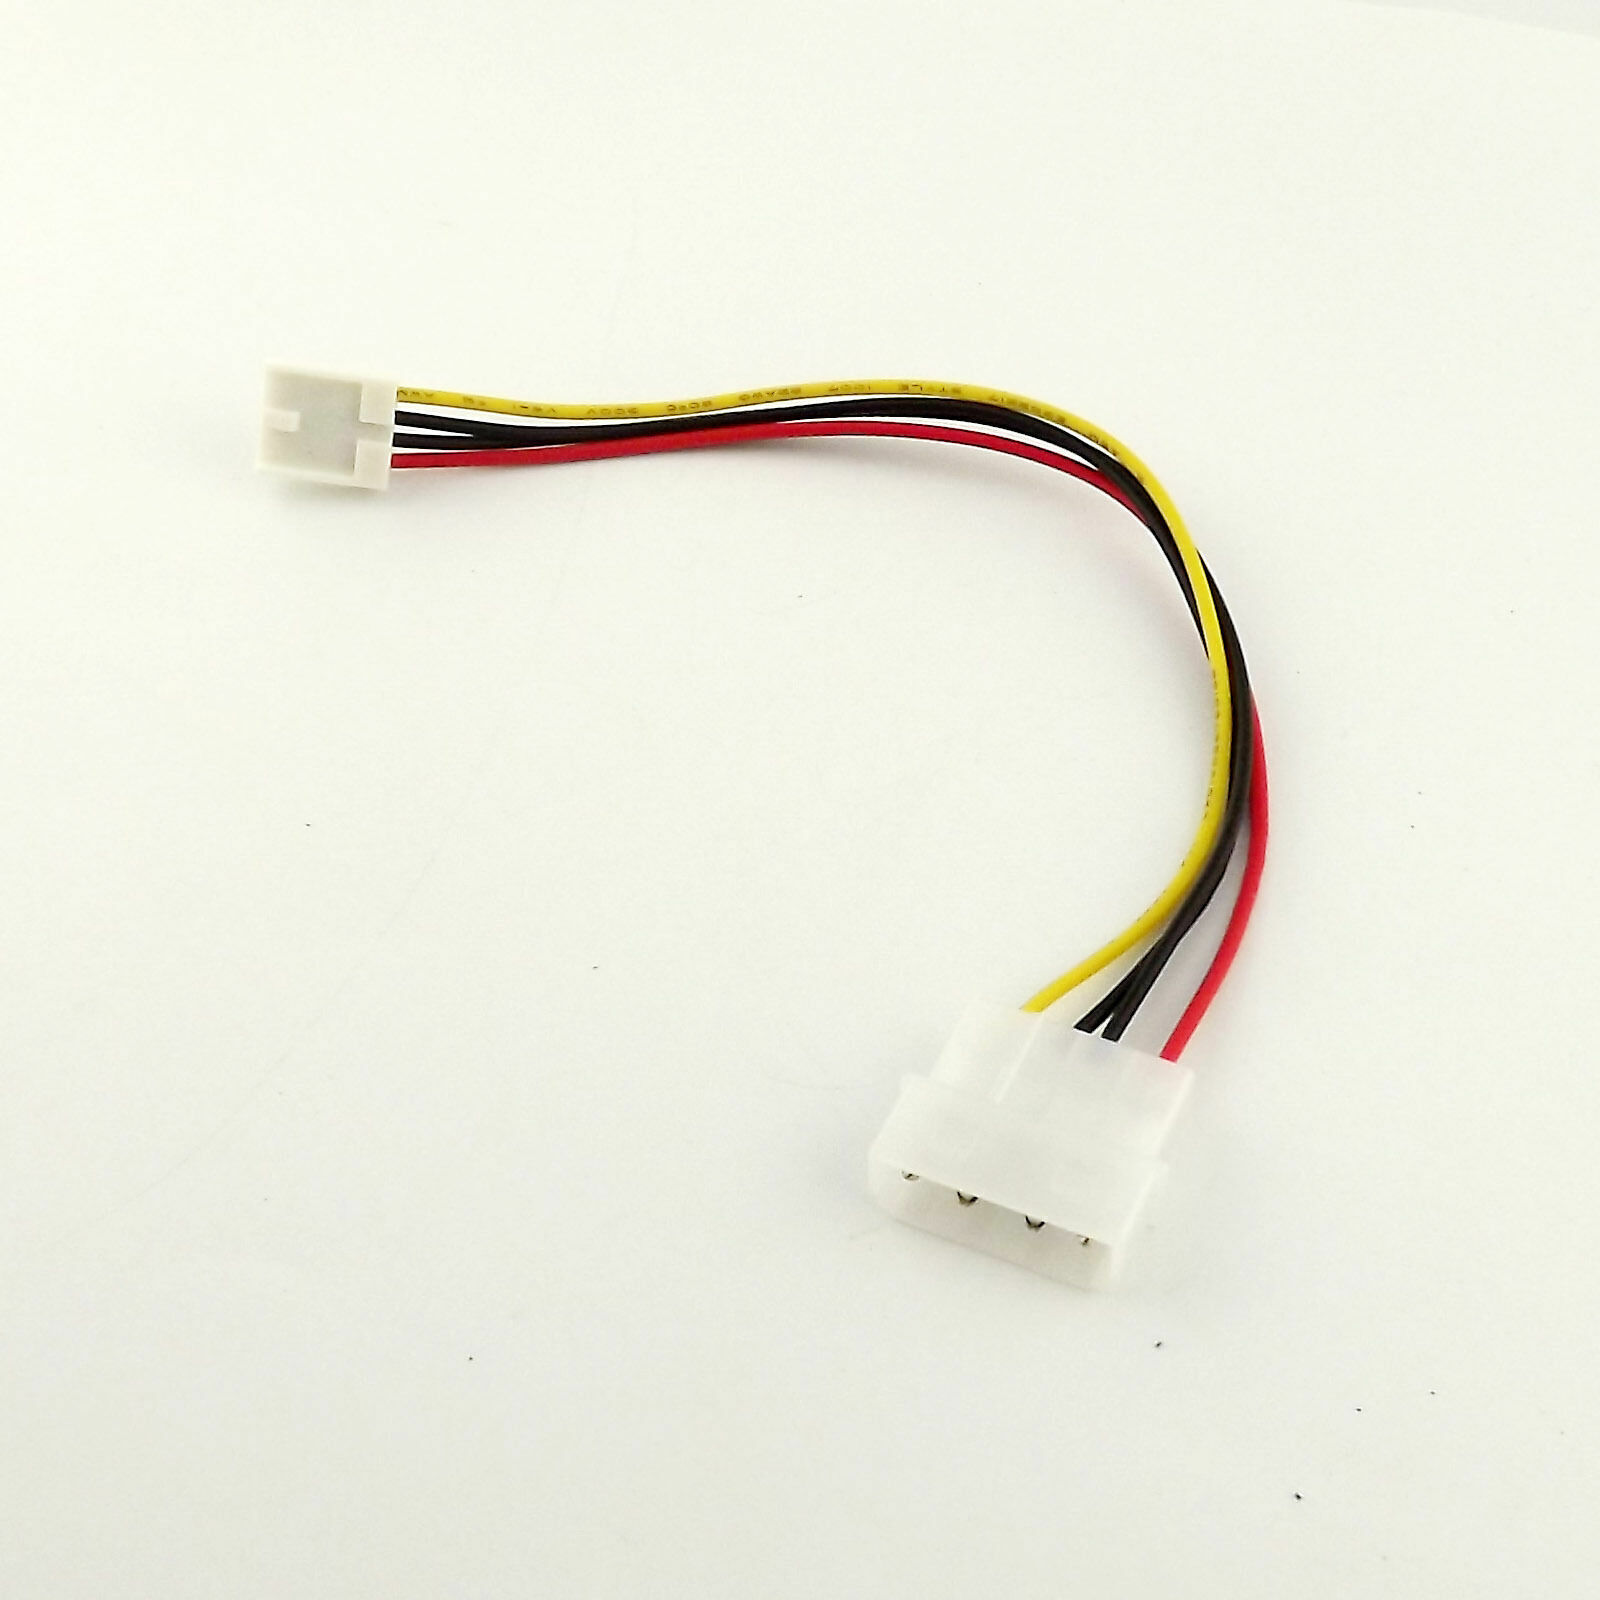 10x 4-Pin Male Molex to Floppy Drive 4-Pin Power Supply Adapter Cable Cord 20cm